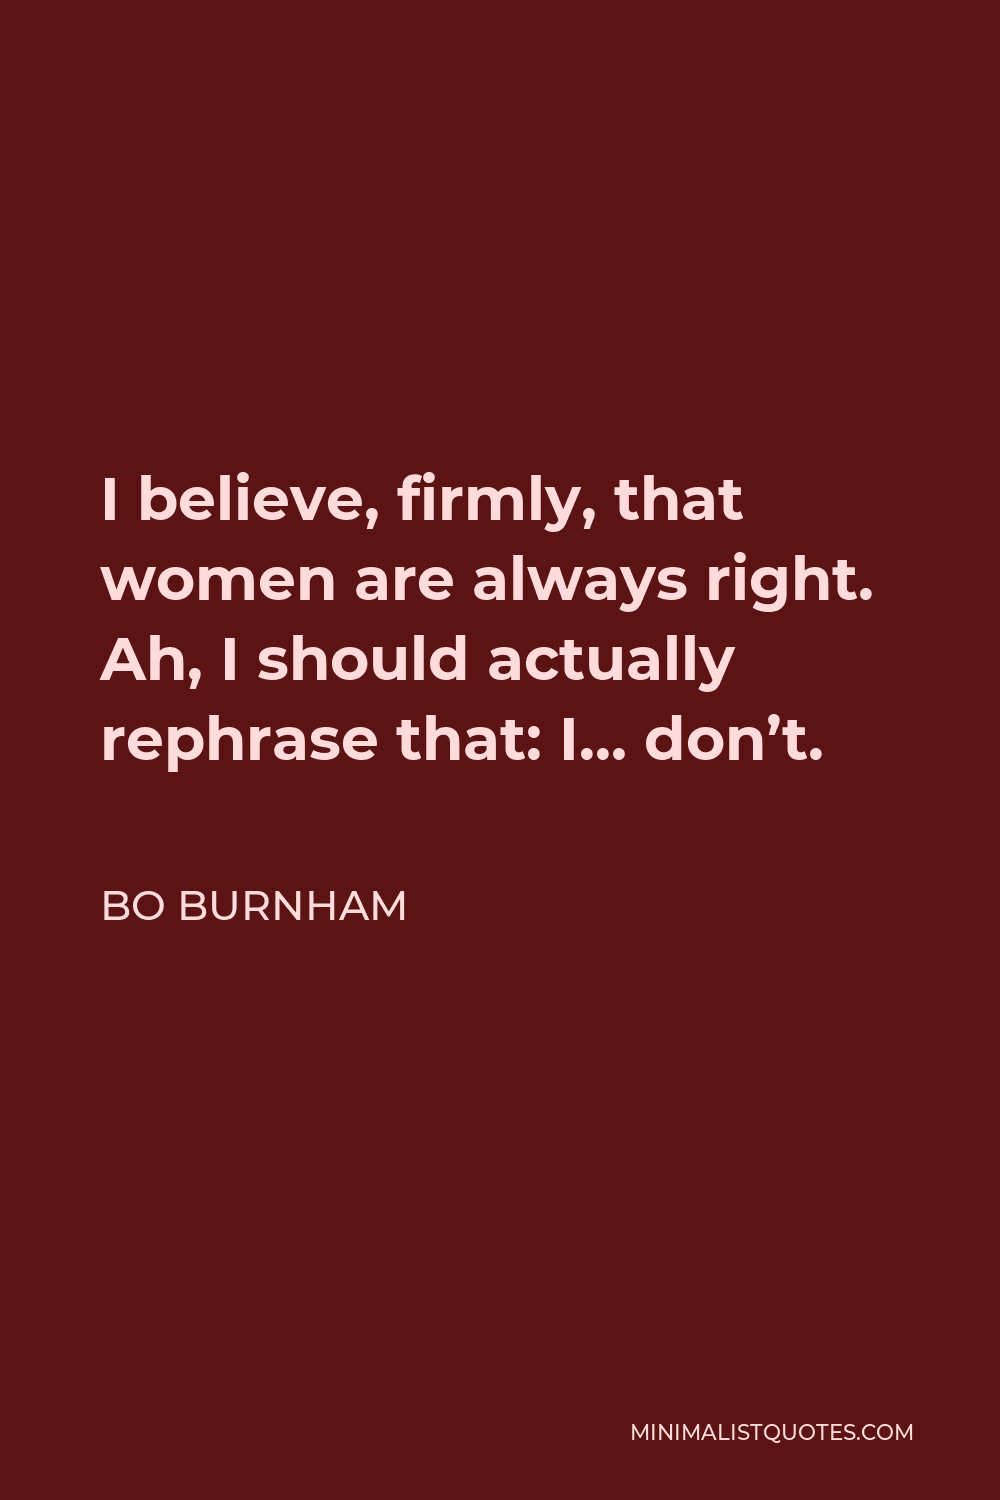 Bo Burnham Quote - I believe, firmly, that women are always right. Ah, I should actually rephrase that: I… don’t.